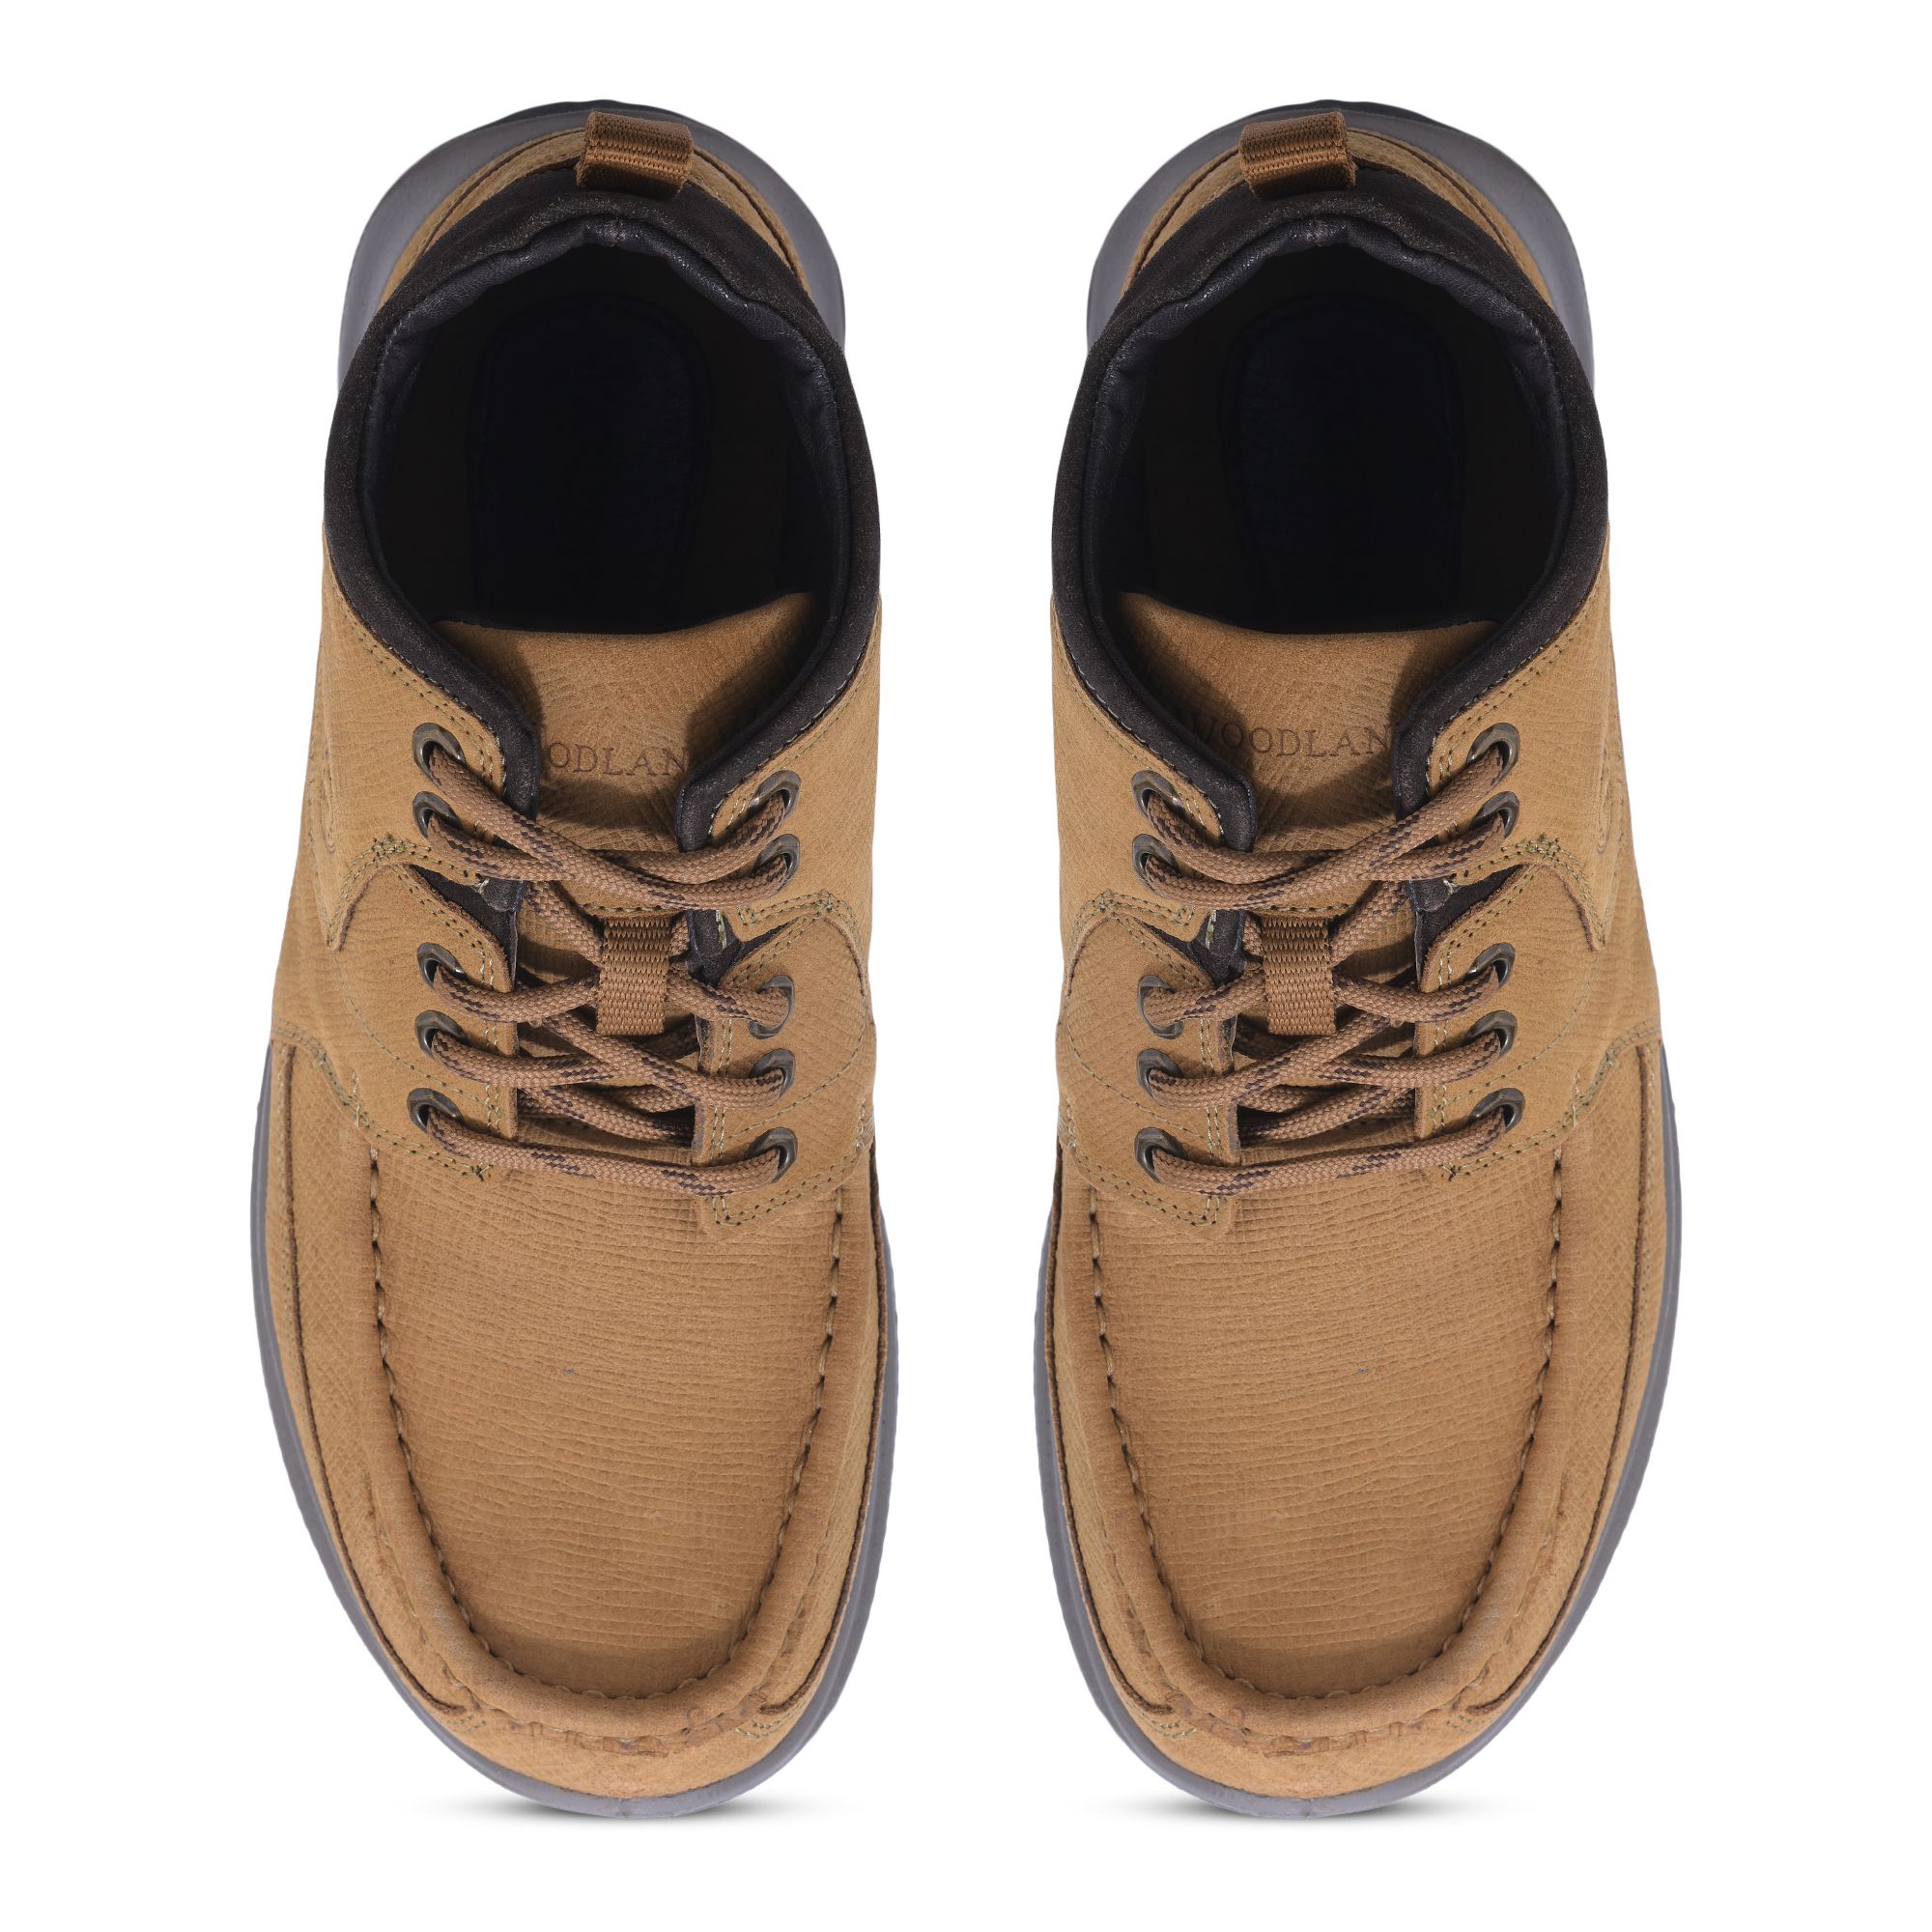 Camel mid-top boot